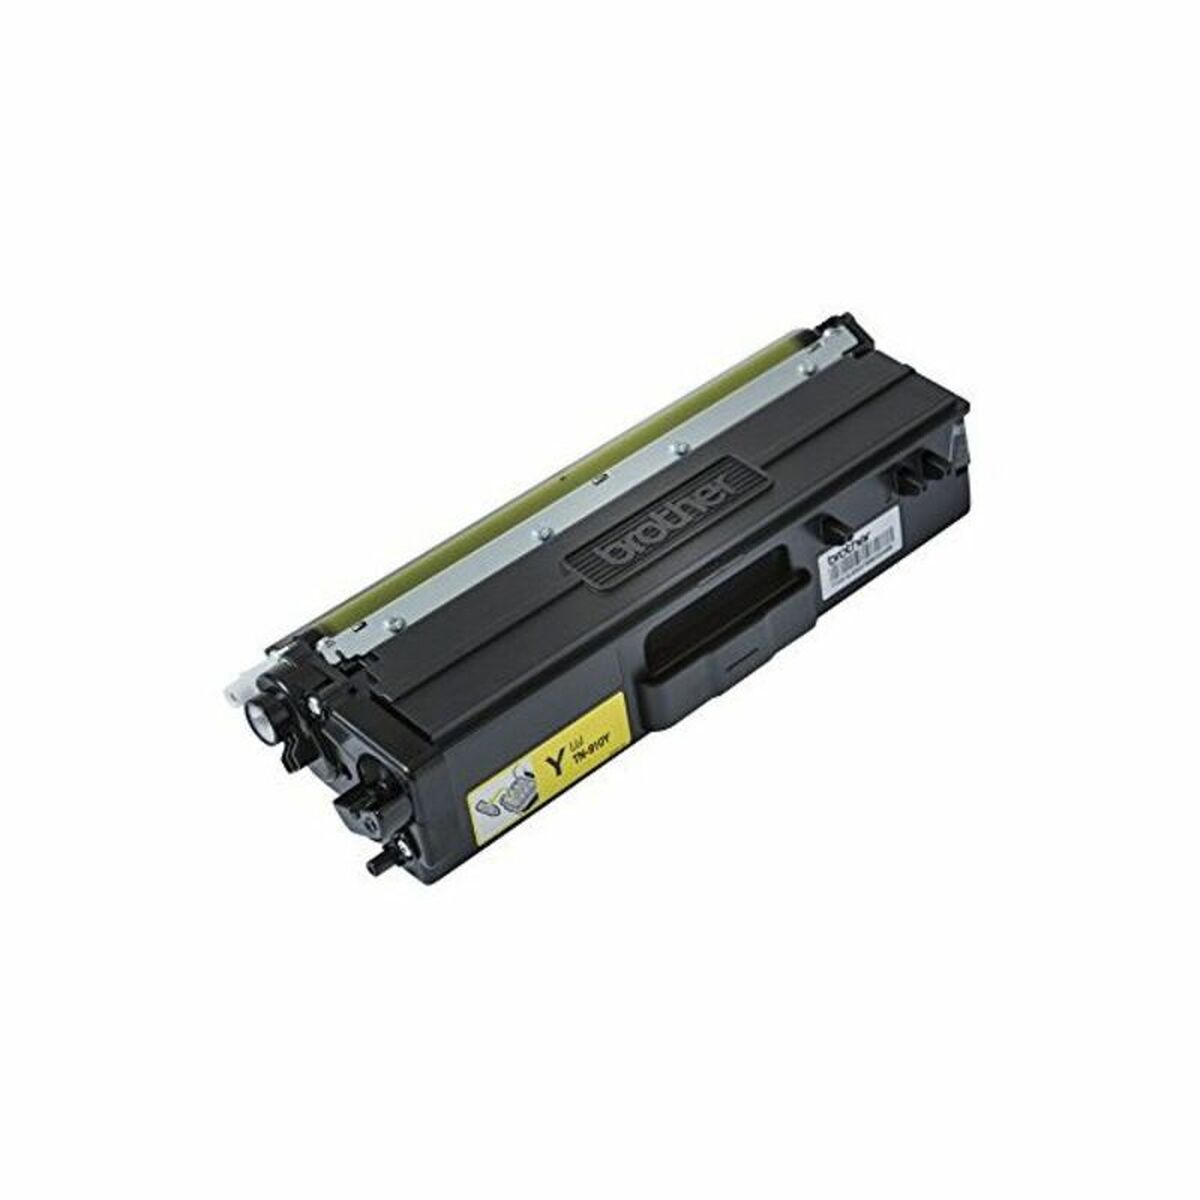 Original Toner Brother TN910Y Yellow Black (1 Unit), Brother, Computing, Printers and accessories, original-toner-brother-tn910y-yellow-black-1-unit, Brand_Brother, category-reference-2609, category-reference-2642, category-reference-2874, category-reference-t-19685, category-reference-t-19911, category-reference-t-21377, category-reference-t-25688, Condition_NEW, office, Price_300 - 400, Teleworking, RiotNook